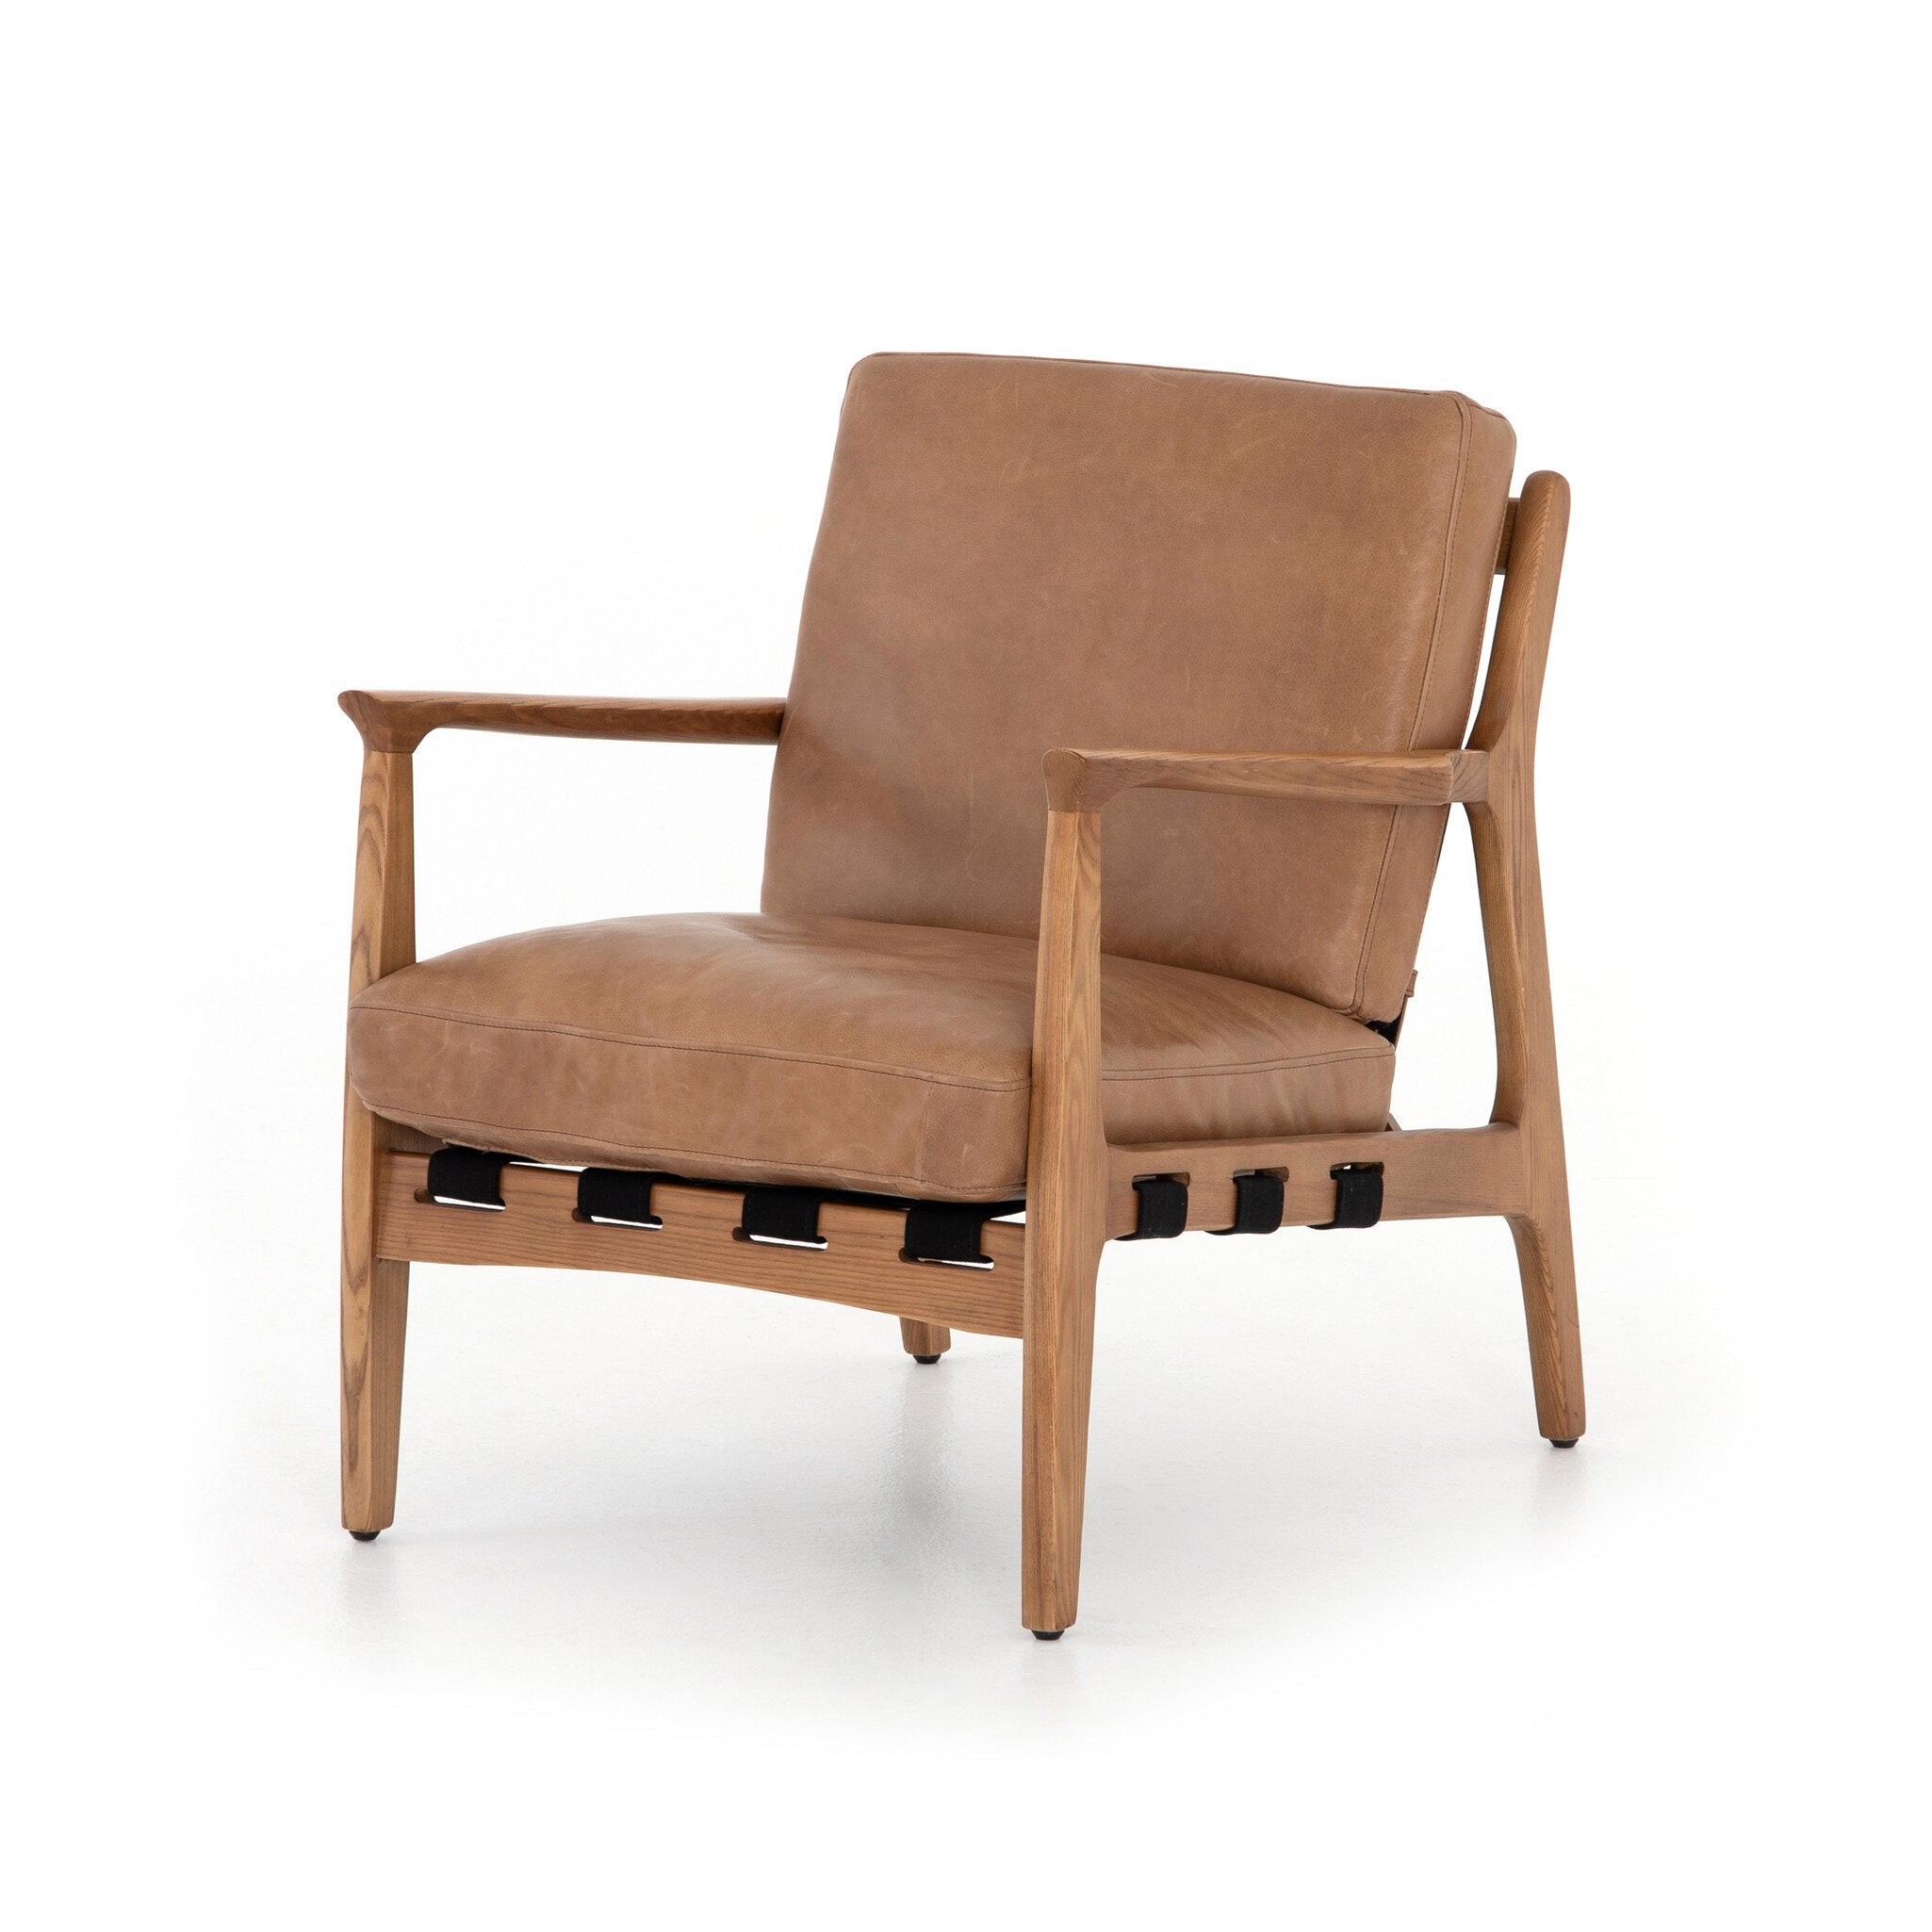 Silas Chair - Patina Copper